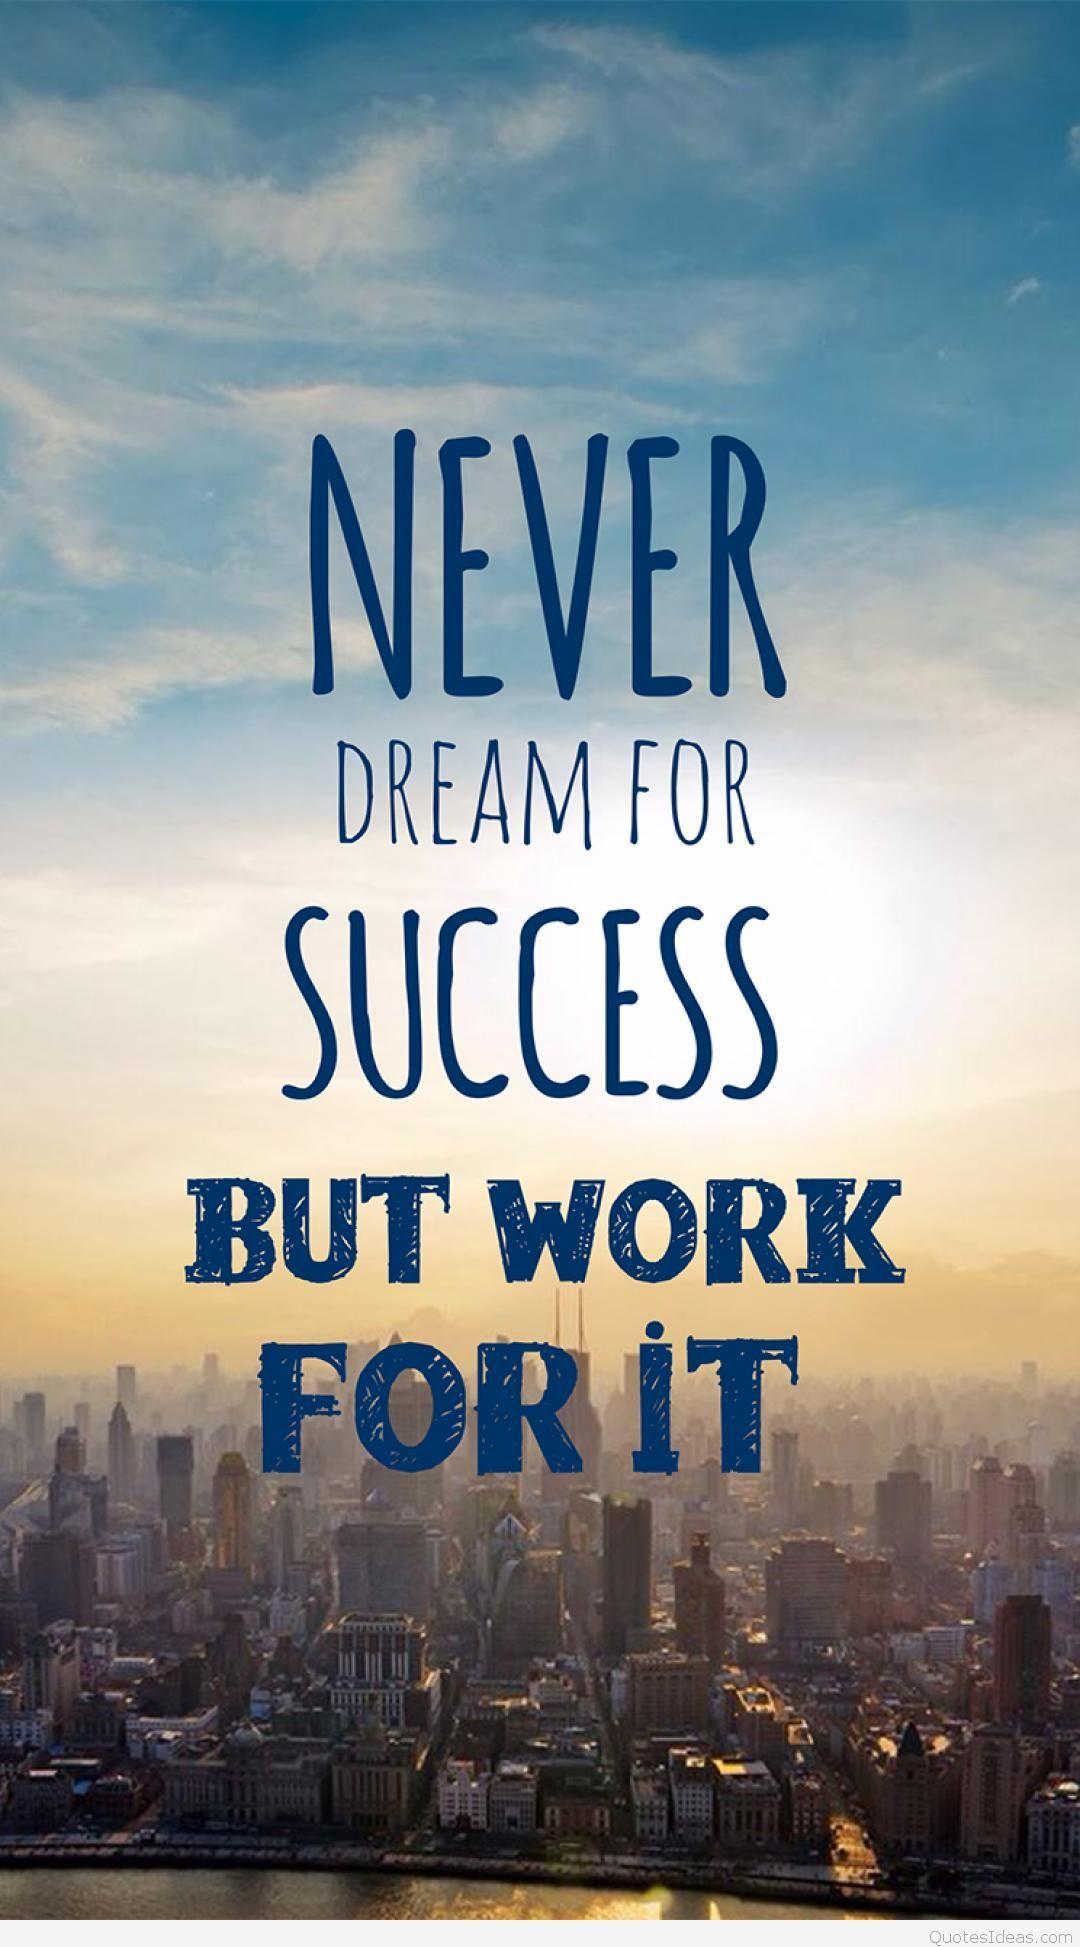 Dream Success quote and wallpaper for mobile phone. Free Wallpaper